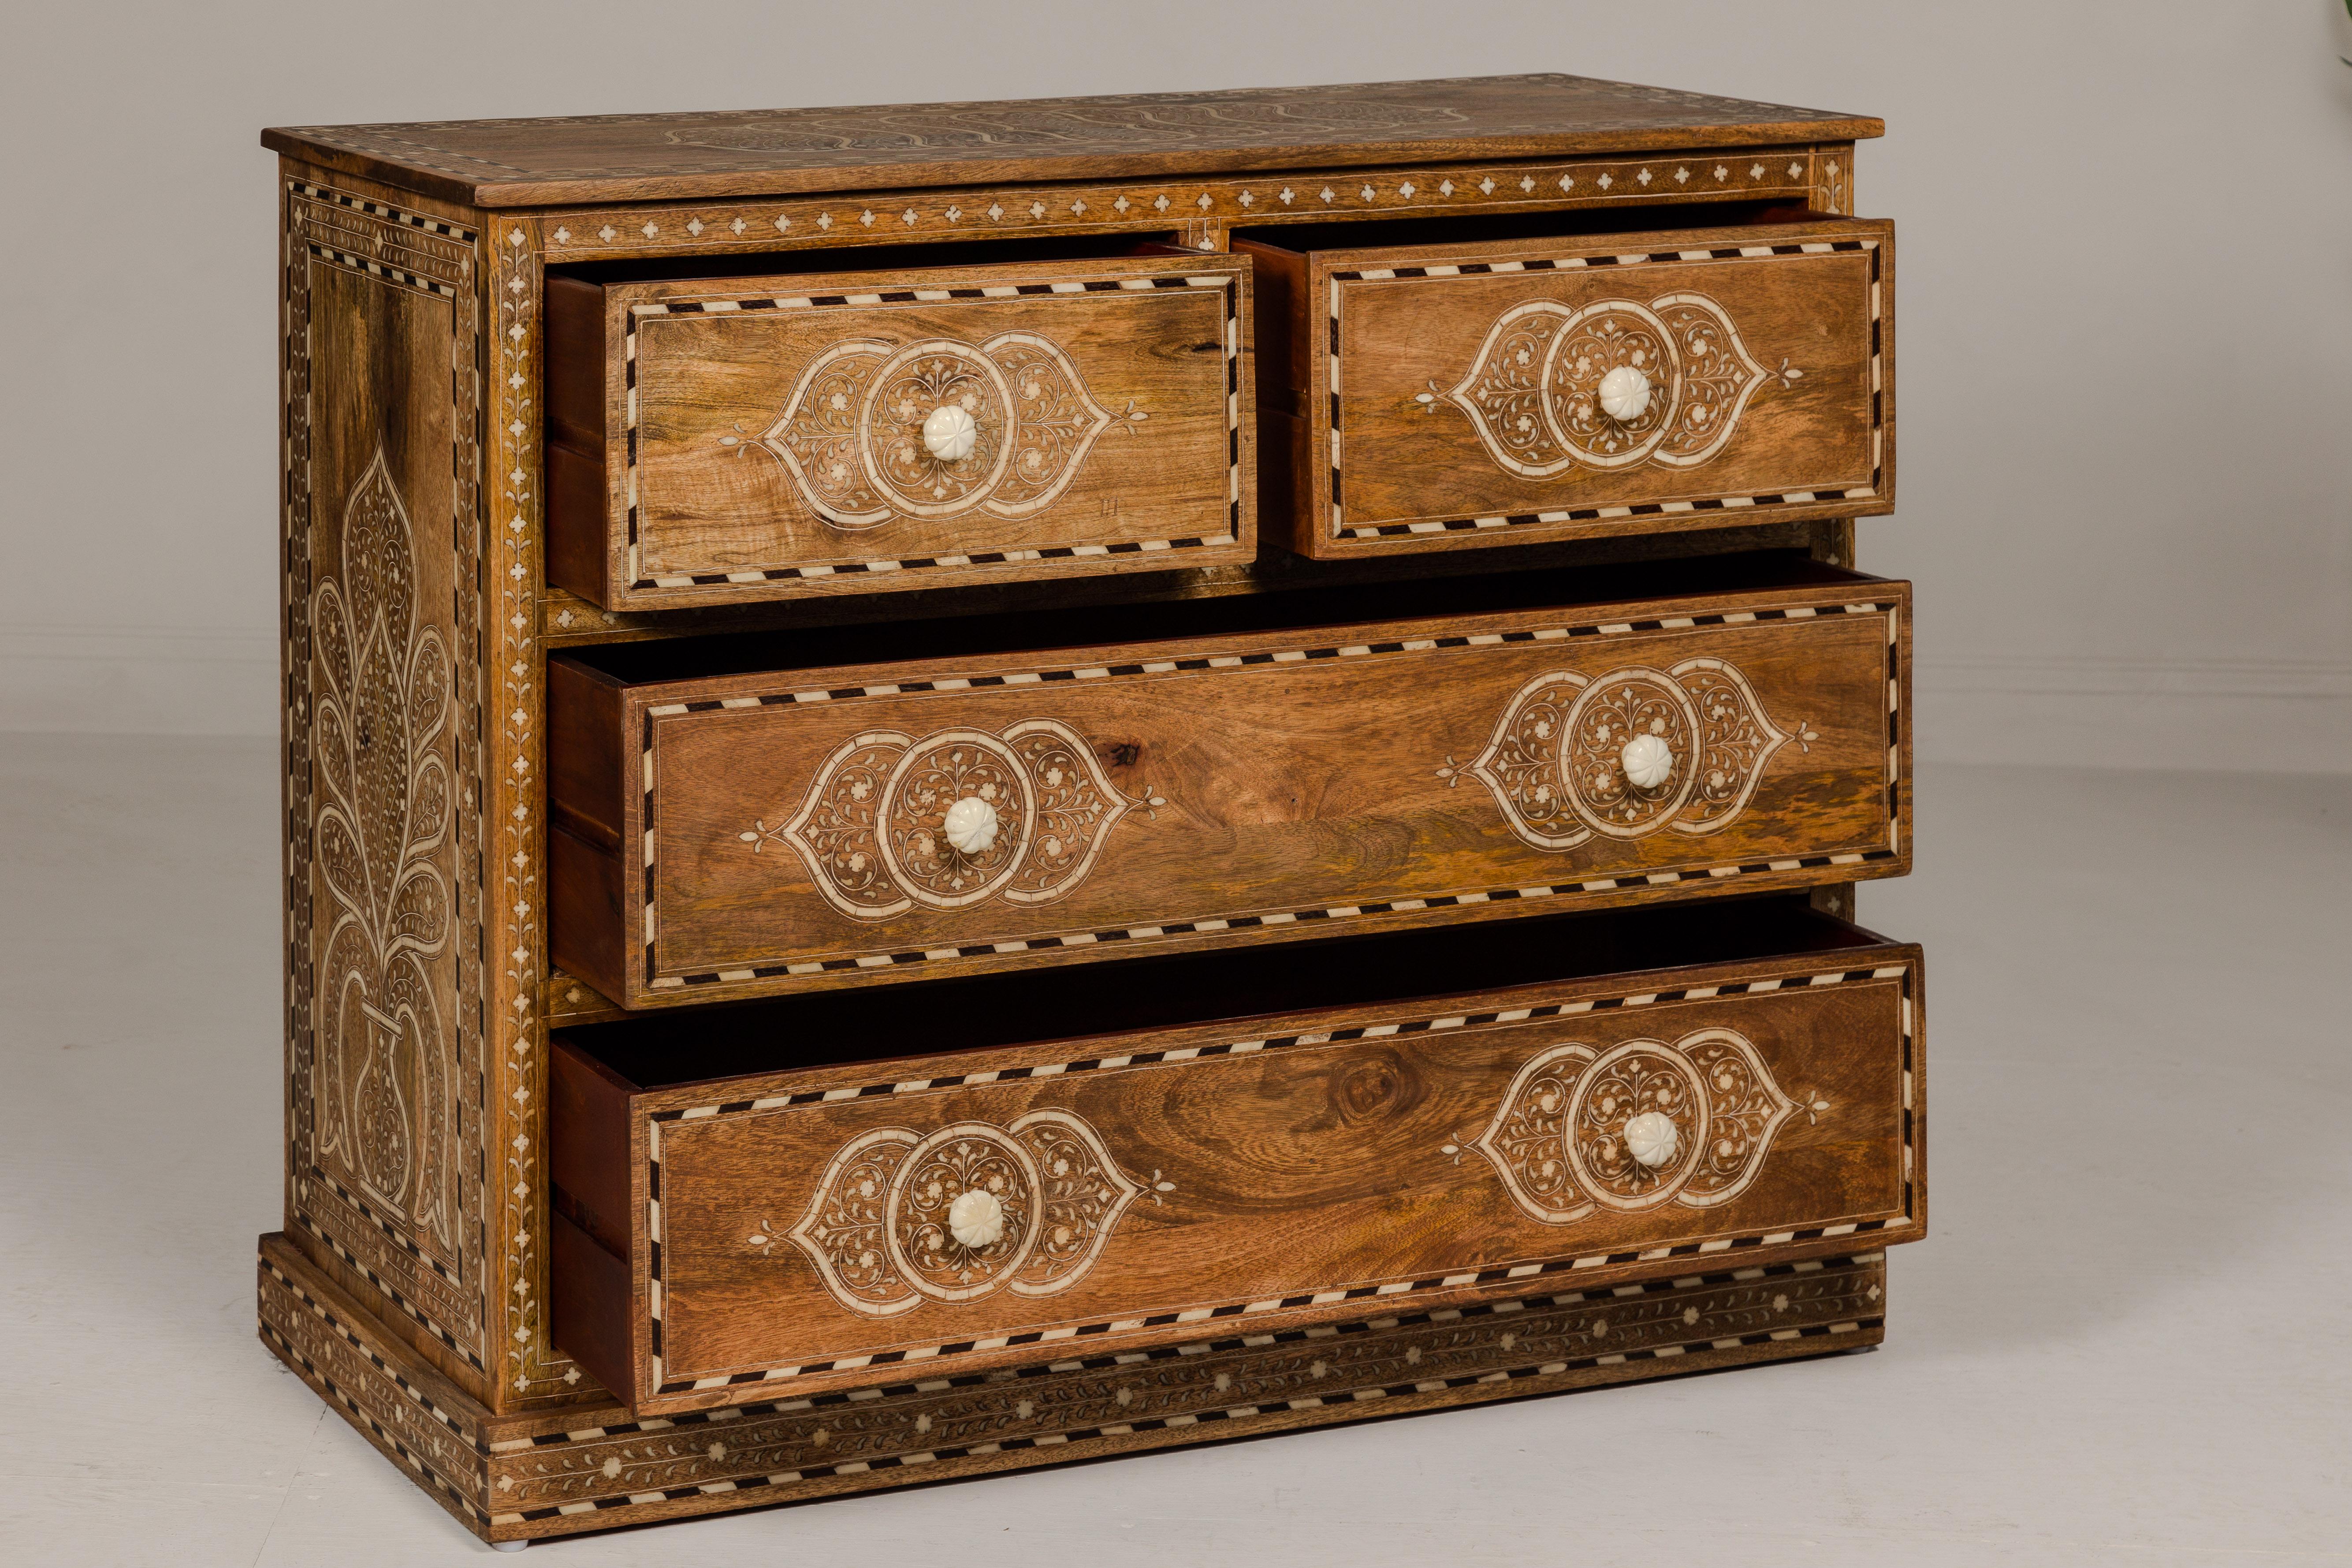 Anglo-Indian Mango Wood Four-Drawer Chest with Floral Themed Bone Inlay For Sale 6